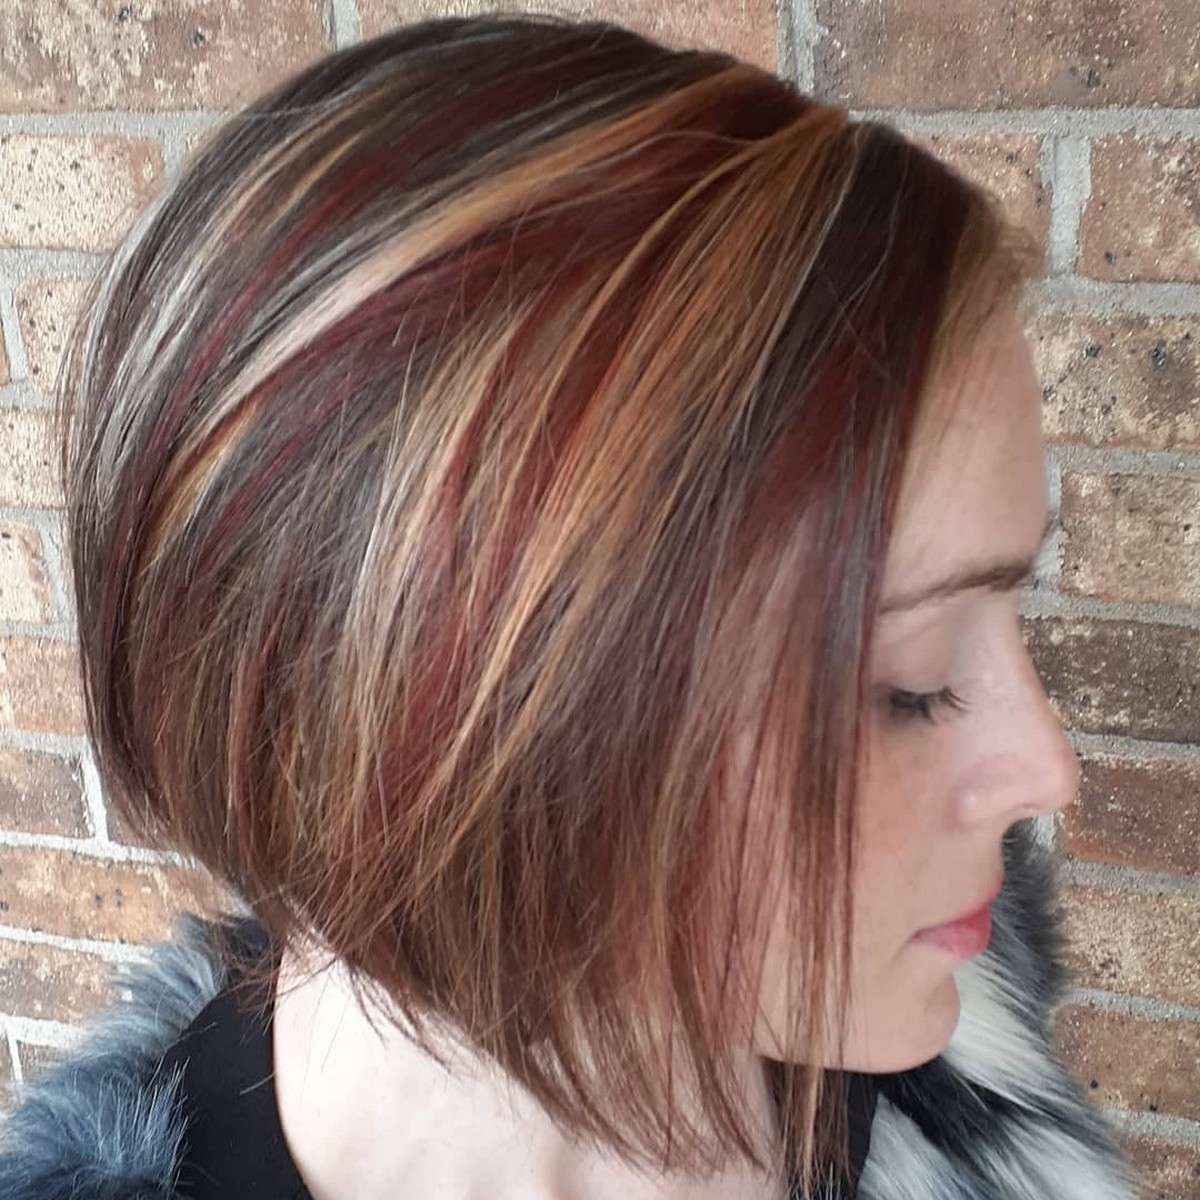 Layered Bob With Light Blonde And Red Highlights